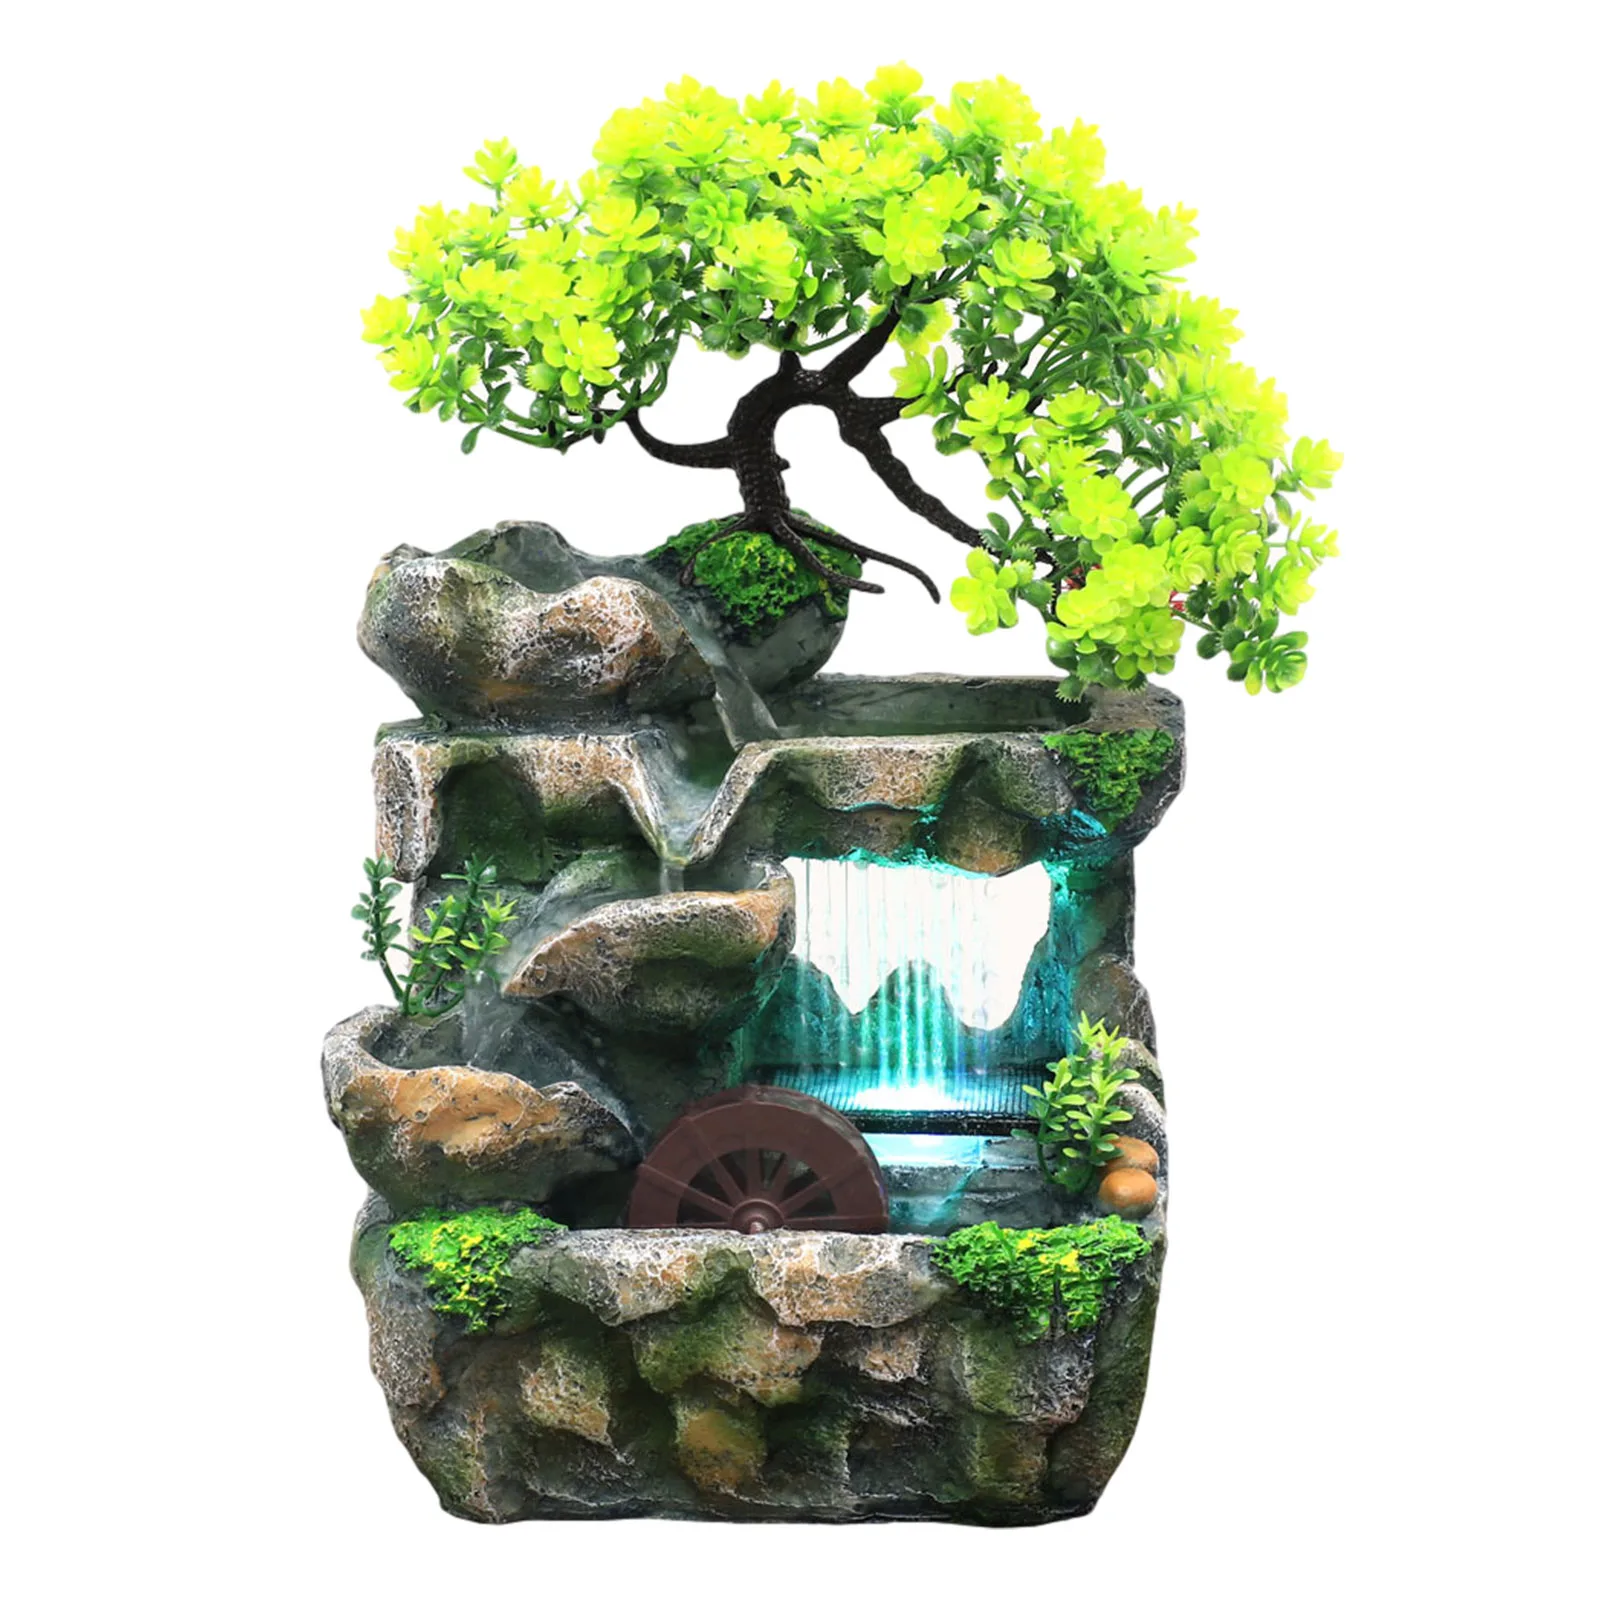 Details about   Desktop Simulation Resin Rockery Water Fountain Bonsai With Atomizer Home Dec US 